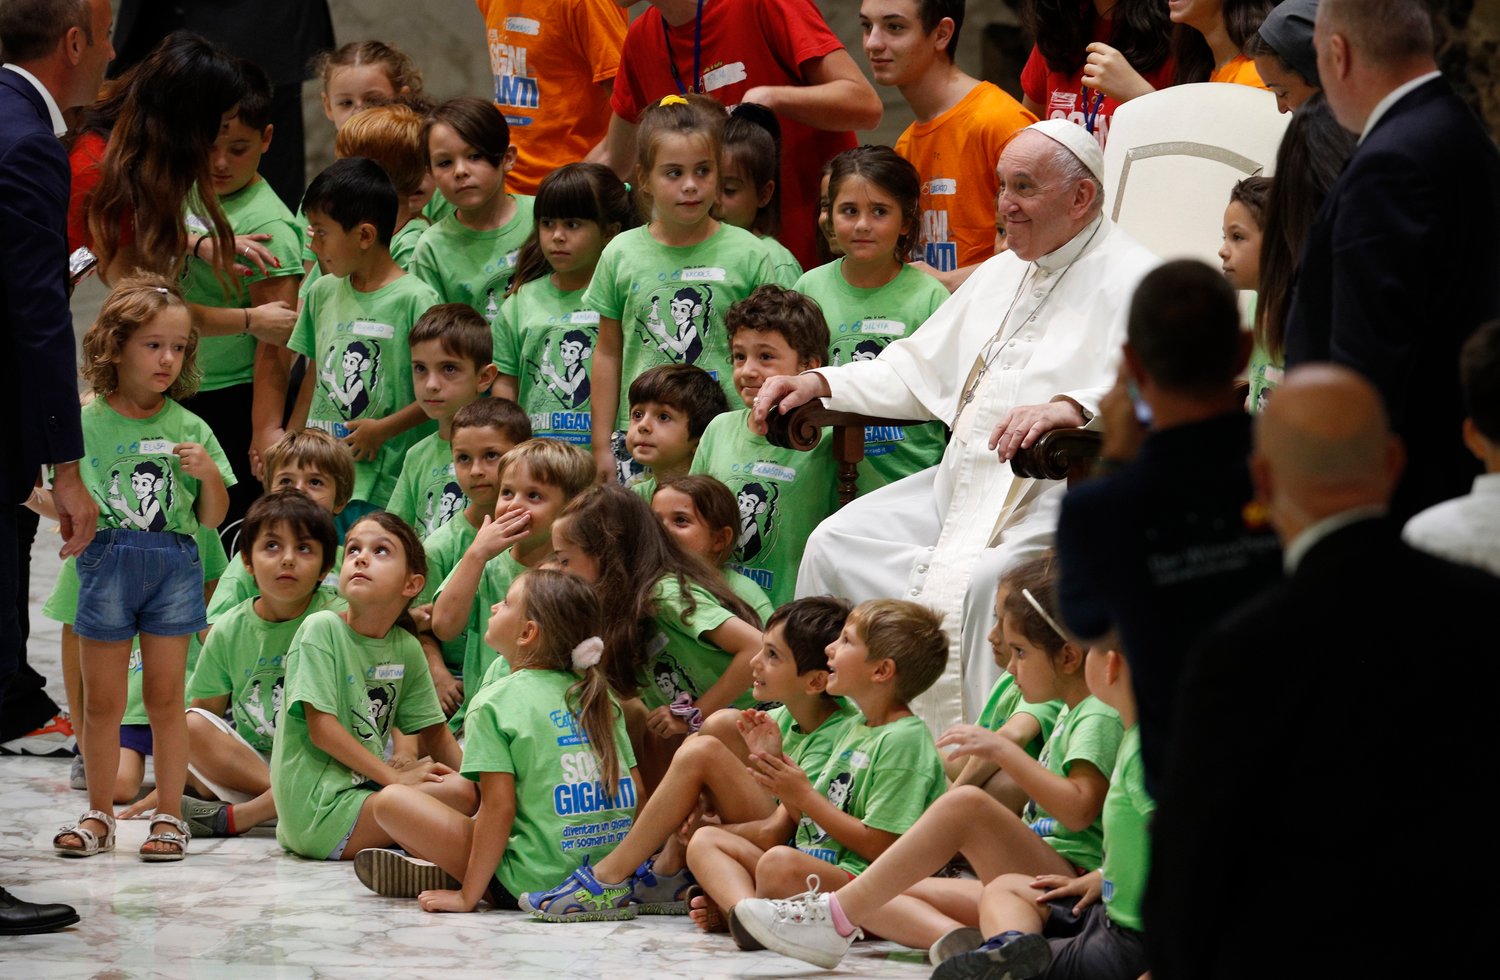 Pope Francis meets children during his general audience in the Paul VI hall at the Vatican Aug. 3.